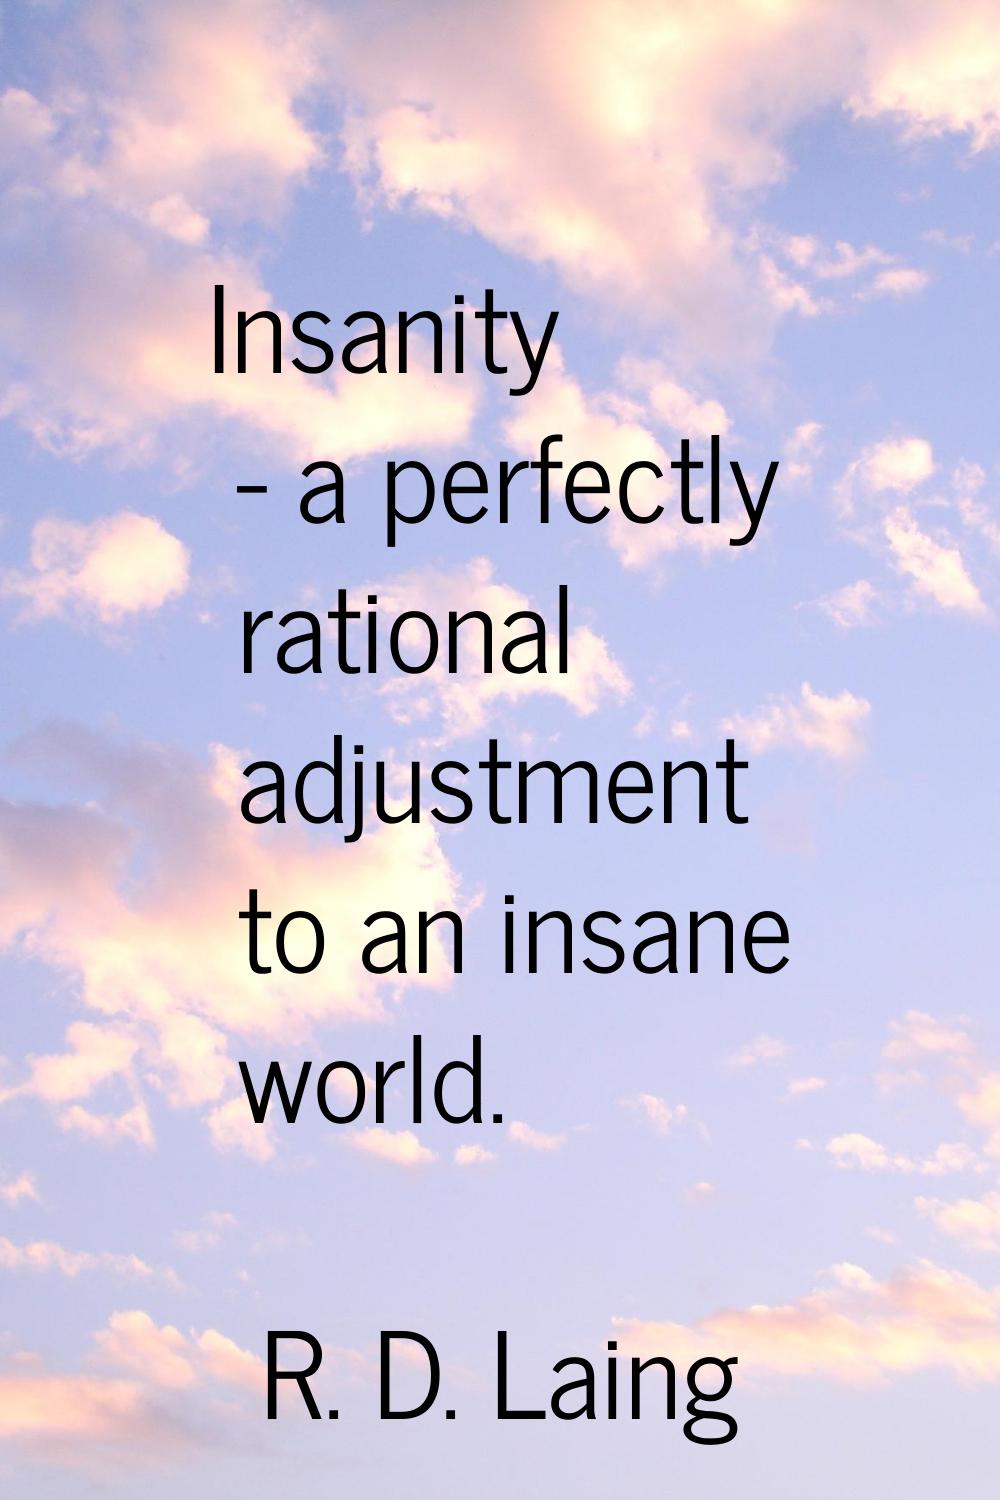 Insanity - a perfectly rational adjustment to an insane world.